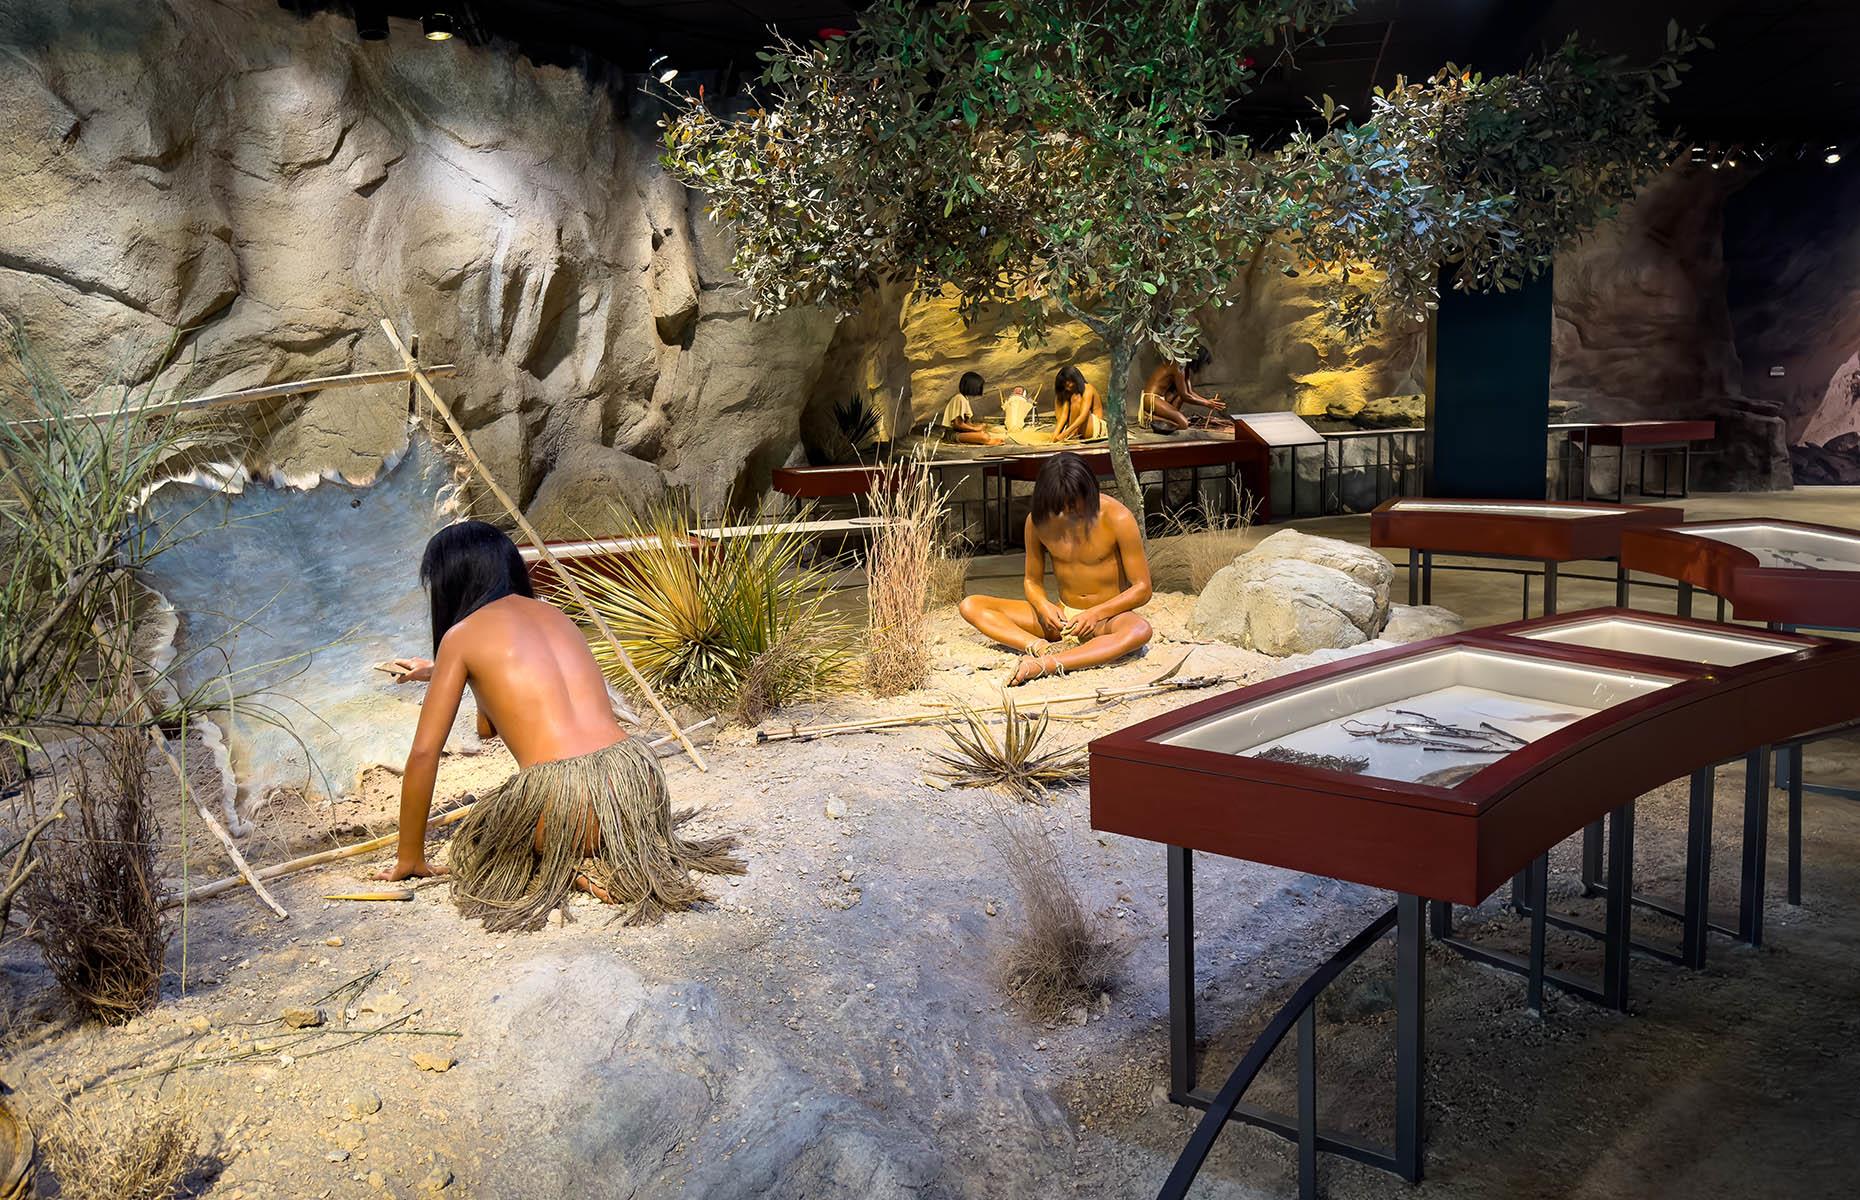 <p>Located on the banks of the San Antonio River, the stunning Witte Museum is where nature, science, and culture meet. Here you’ll find massive exhibits on dinosaurs, the people of the Pecos, and wild Texas in a cavernous, recently renovated space that feels like a cathedral to learning.</p>  <p>You’ll find recreations of traditional Texas buildings in the beautifully maintained grounds and, tucked away in the South Texas Heritage Center, a real treat: Davy Crockett’s fiddle, which he may or may not have played as the Alamo lay under siege.</p>